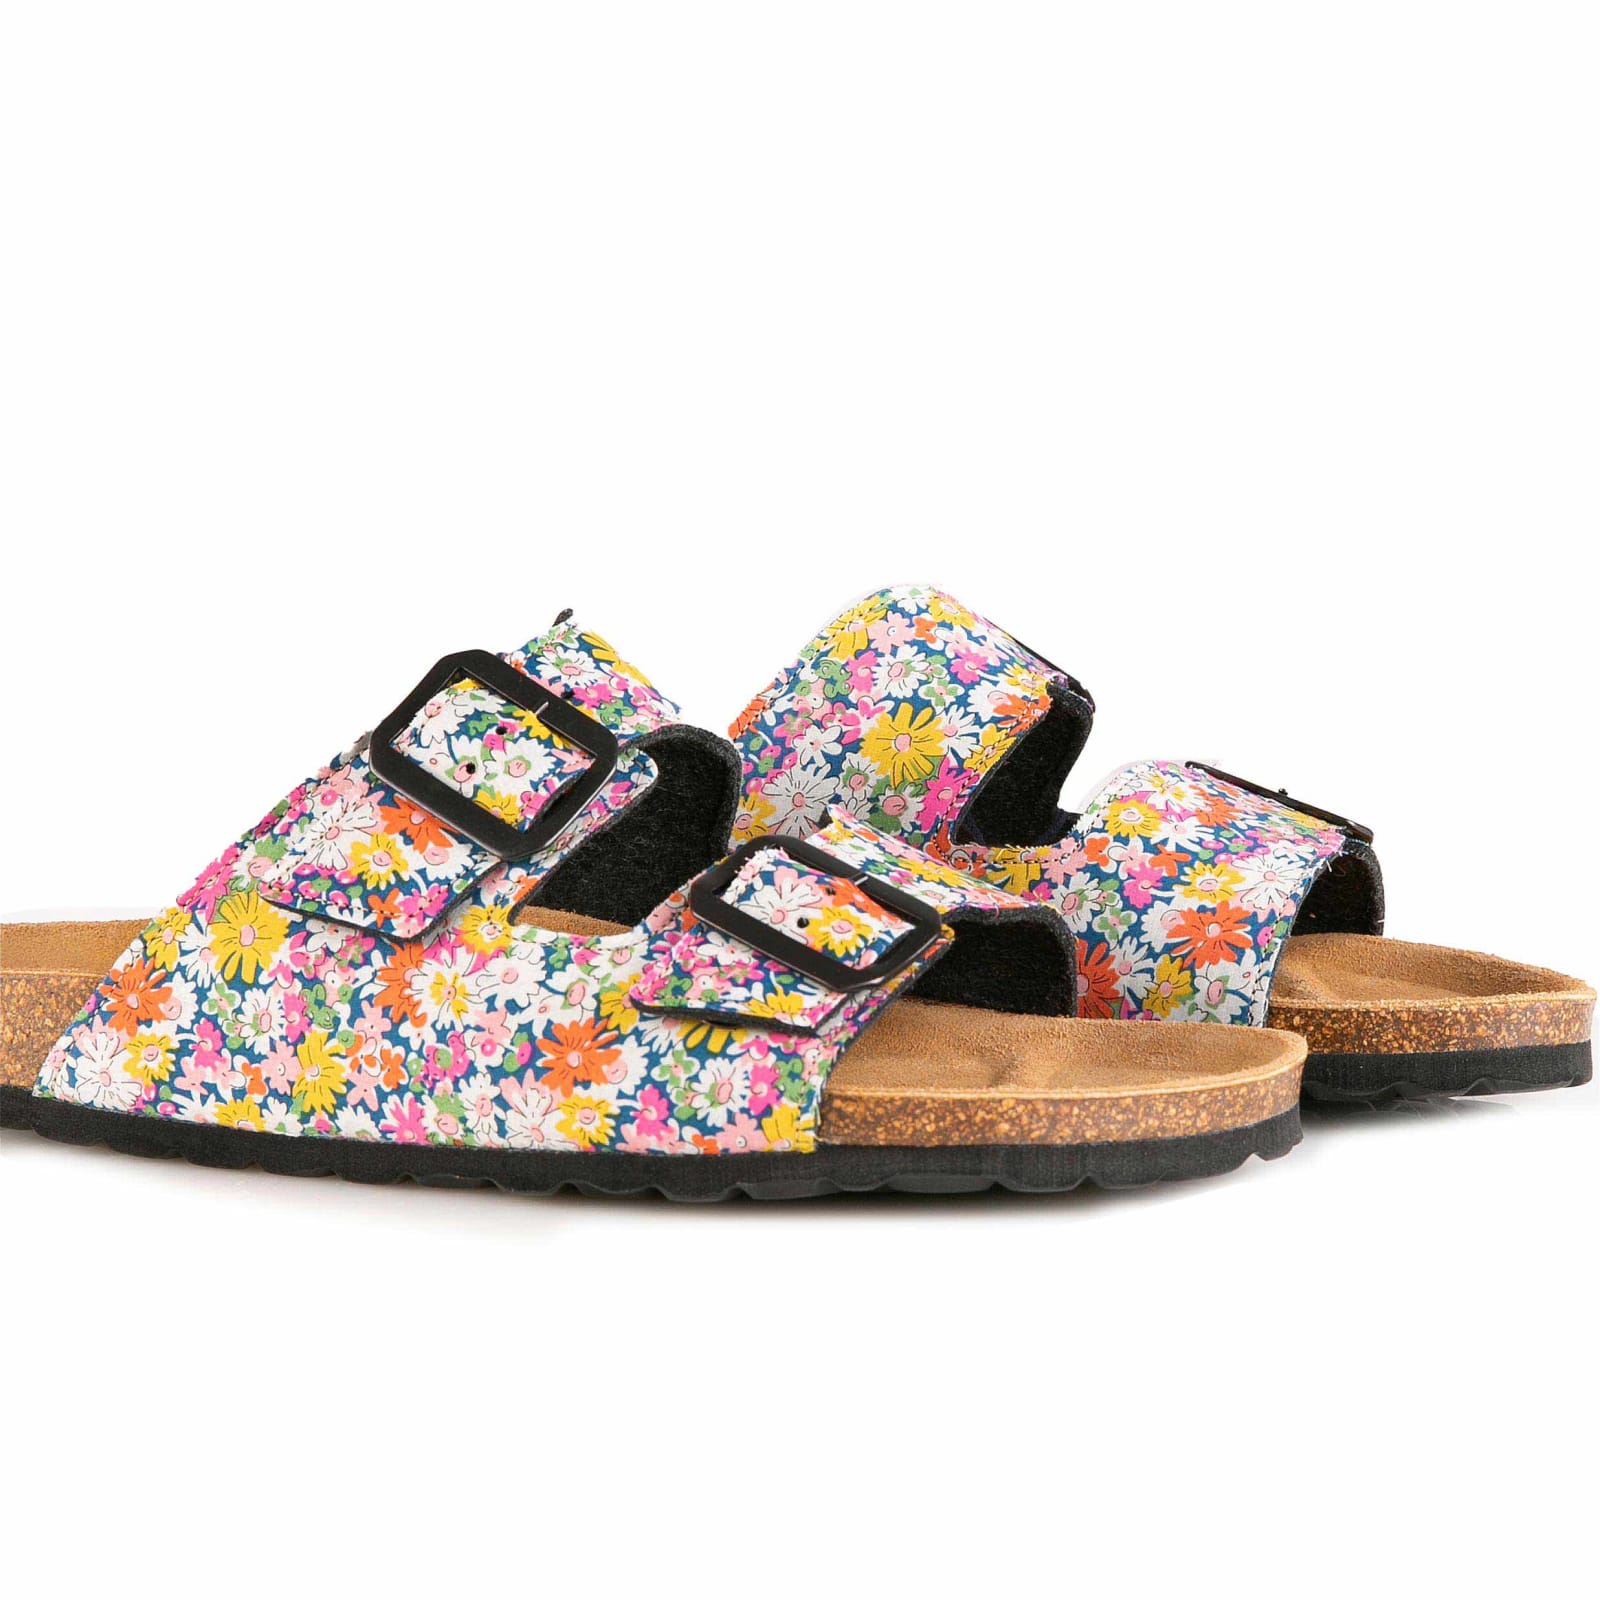 Woman Sandals With Flower Print